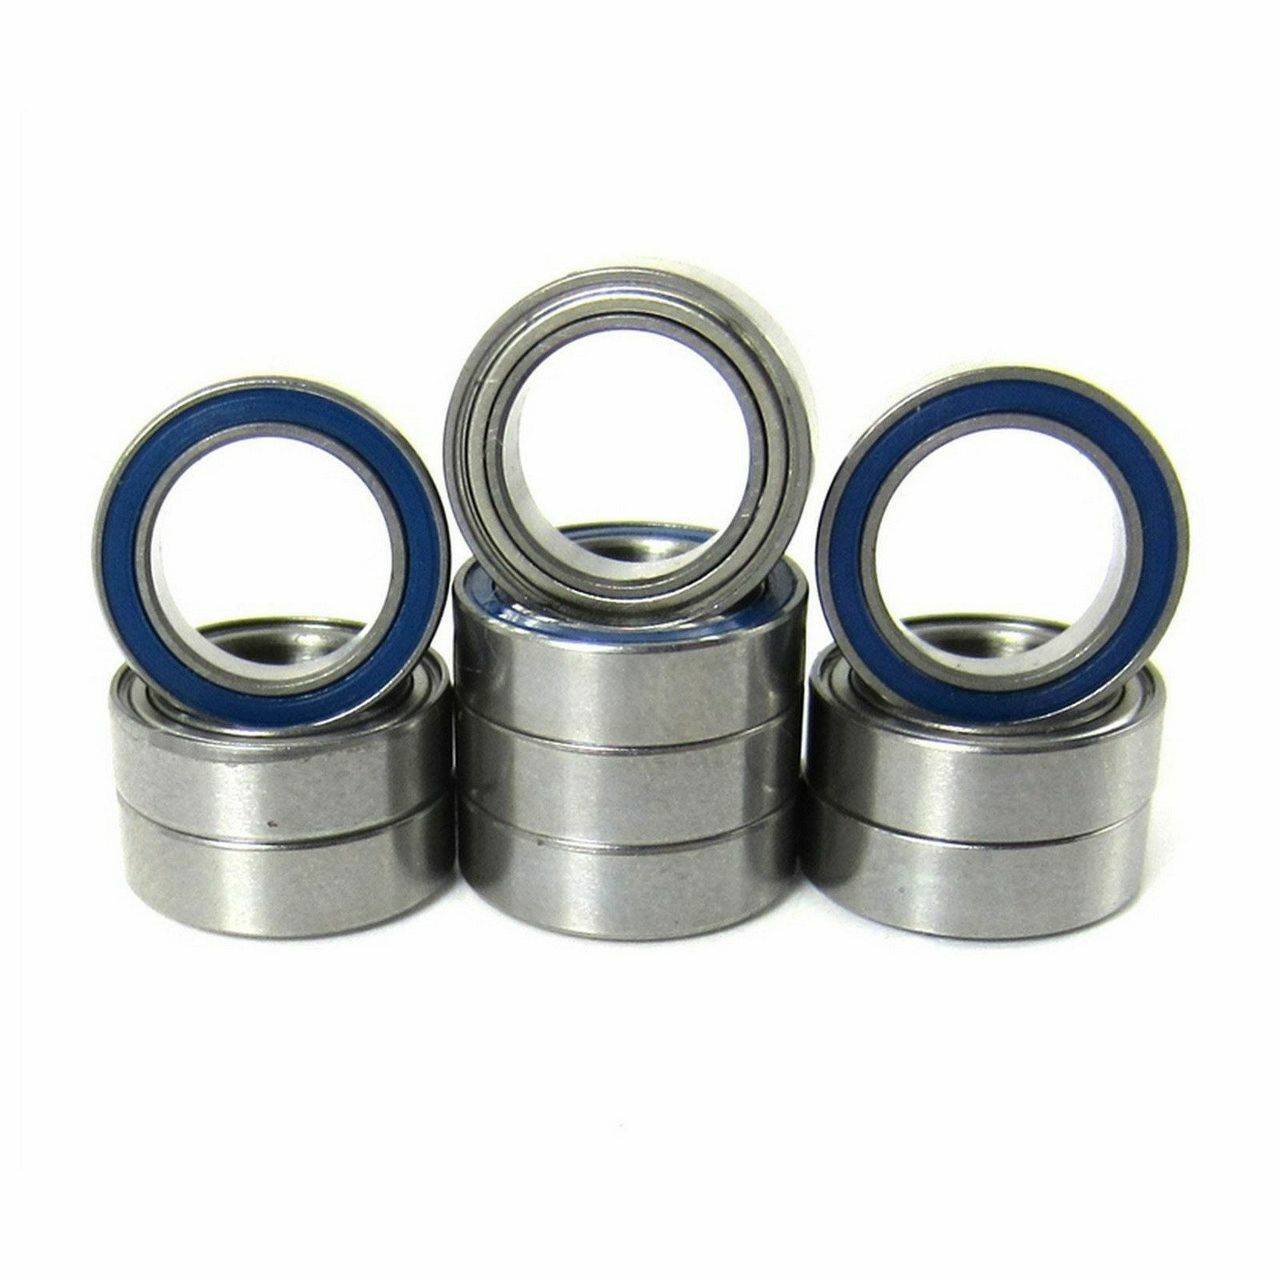 MR128-RZ 8x12x3.5mm Precision High Speed RC Ball Bearing, Chrome Steel (GCr15) with 1 Blue Rubber Seal & 1 Metal Shield